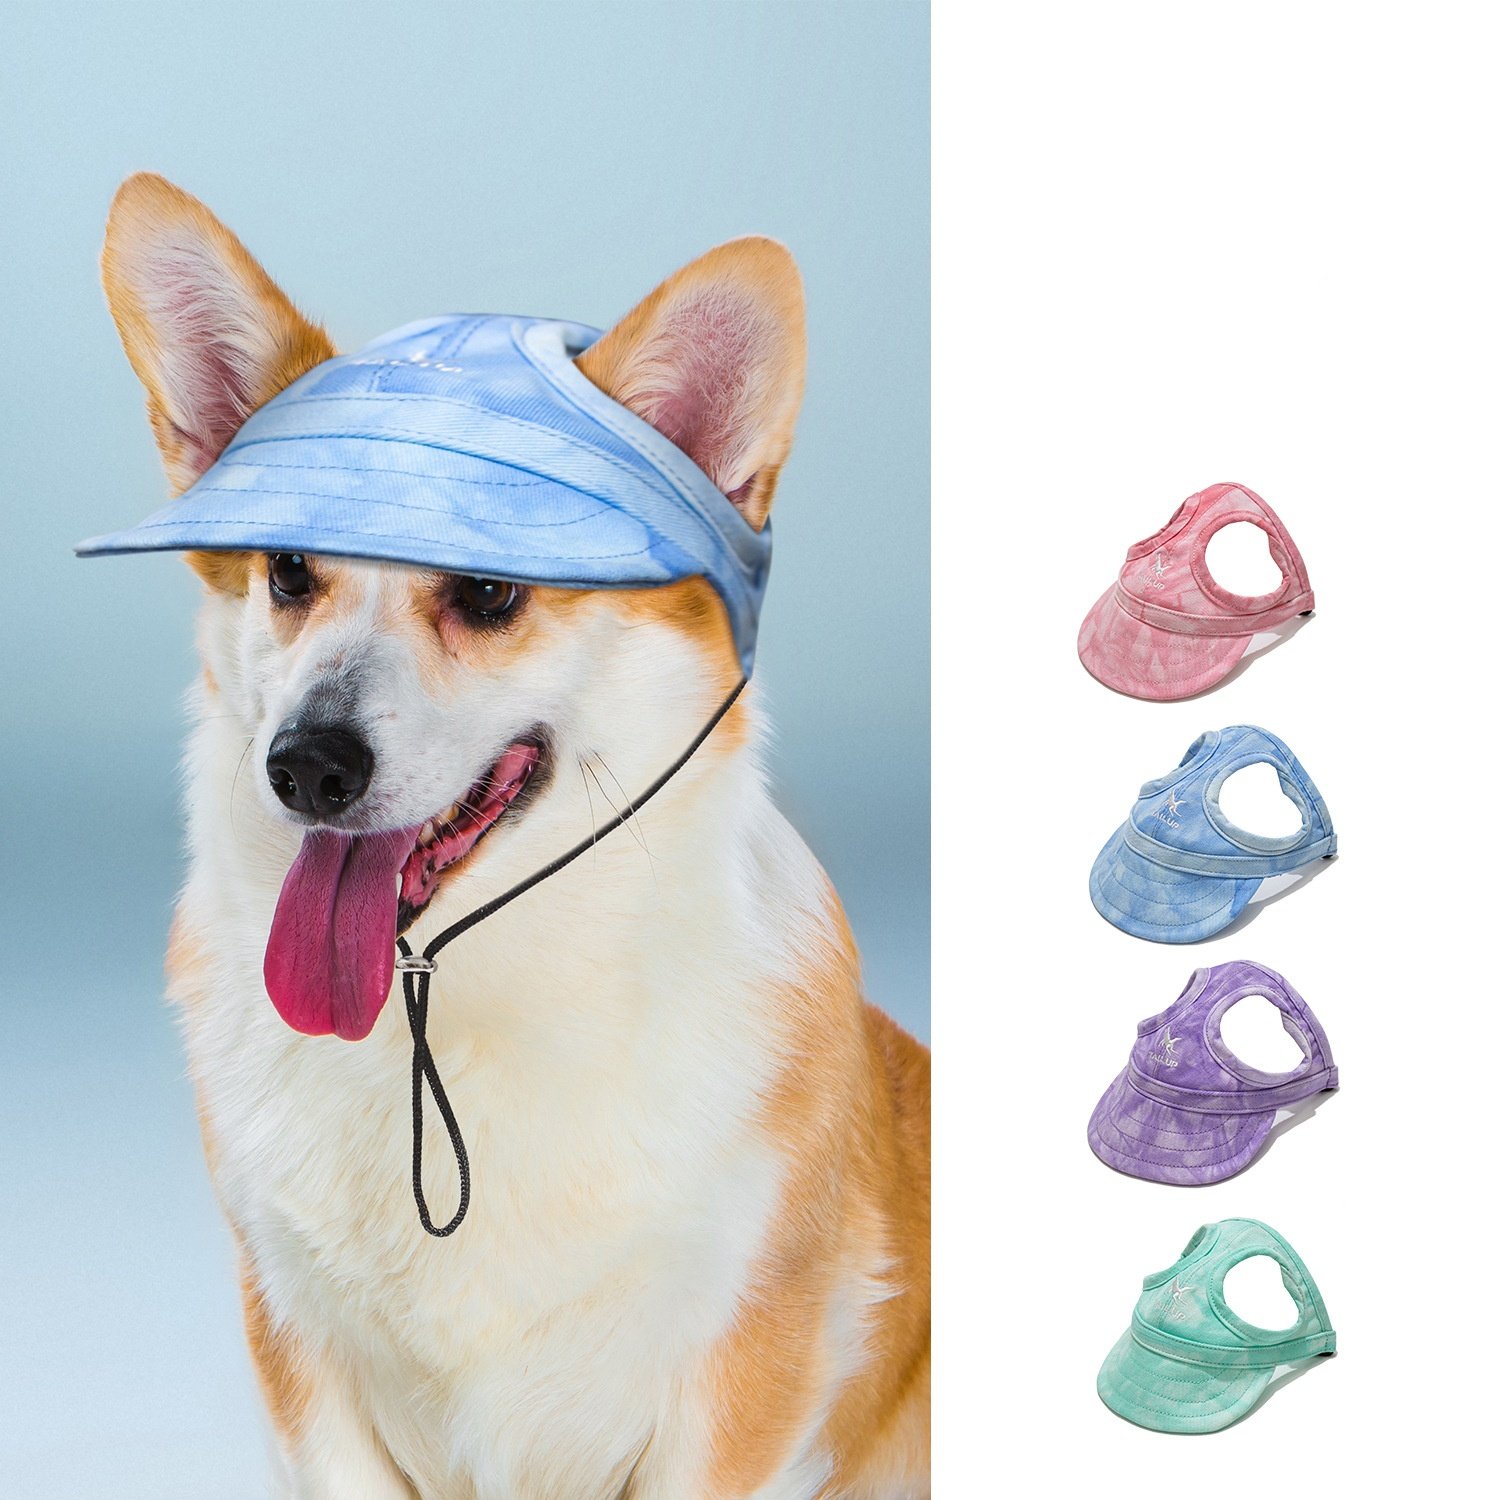 👍Last Day Promotion 50% OFF💥Outdoor Sun Protection Hood For Dogs - Buy 2 Get Free Shipping Now!!!